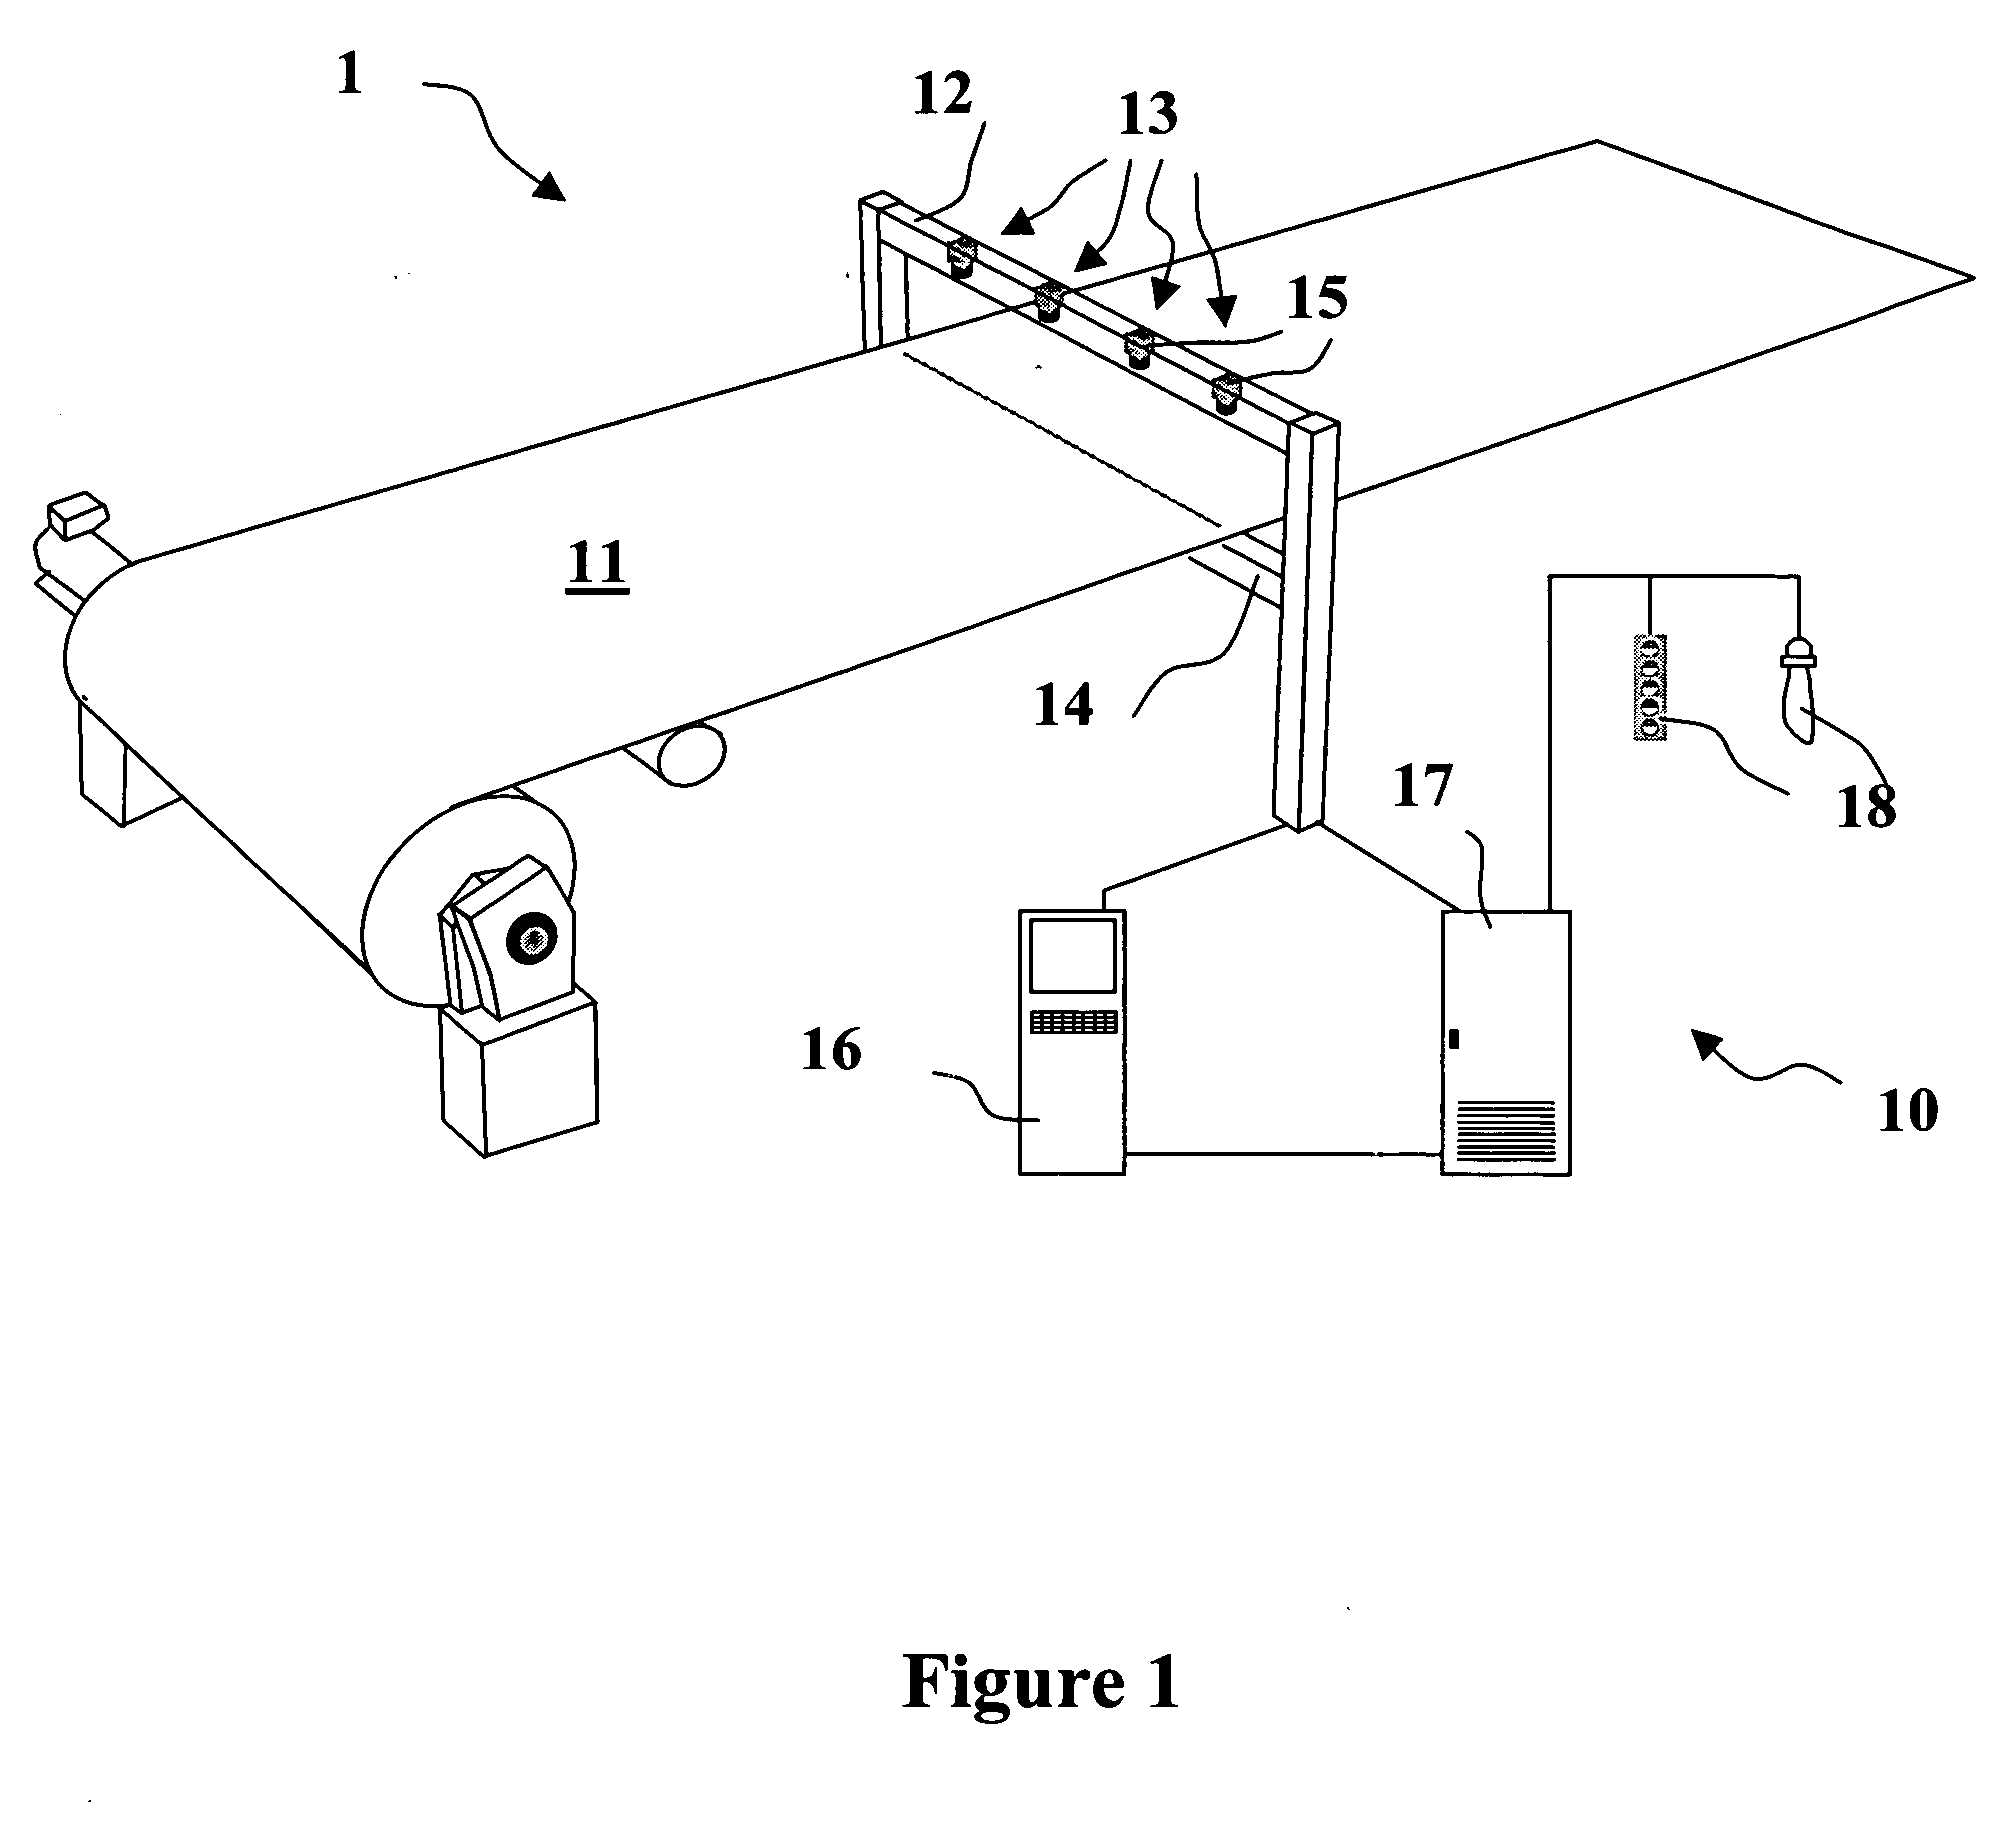 Method and apparatus for labeling images and creating training material